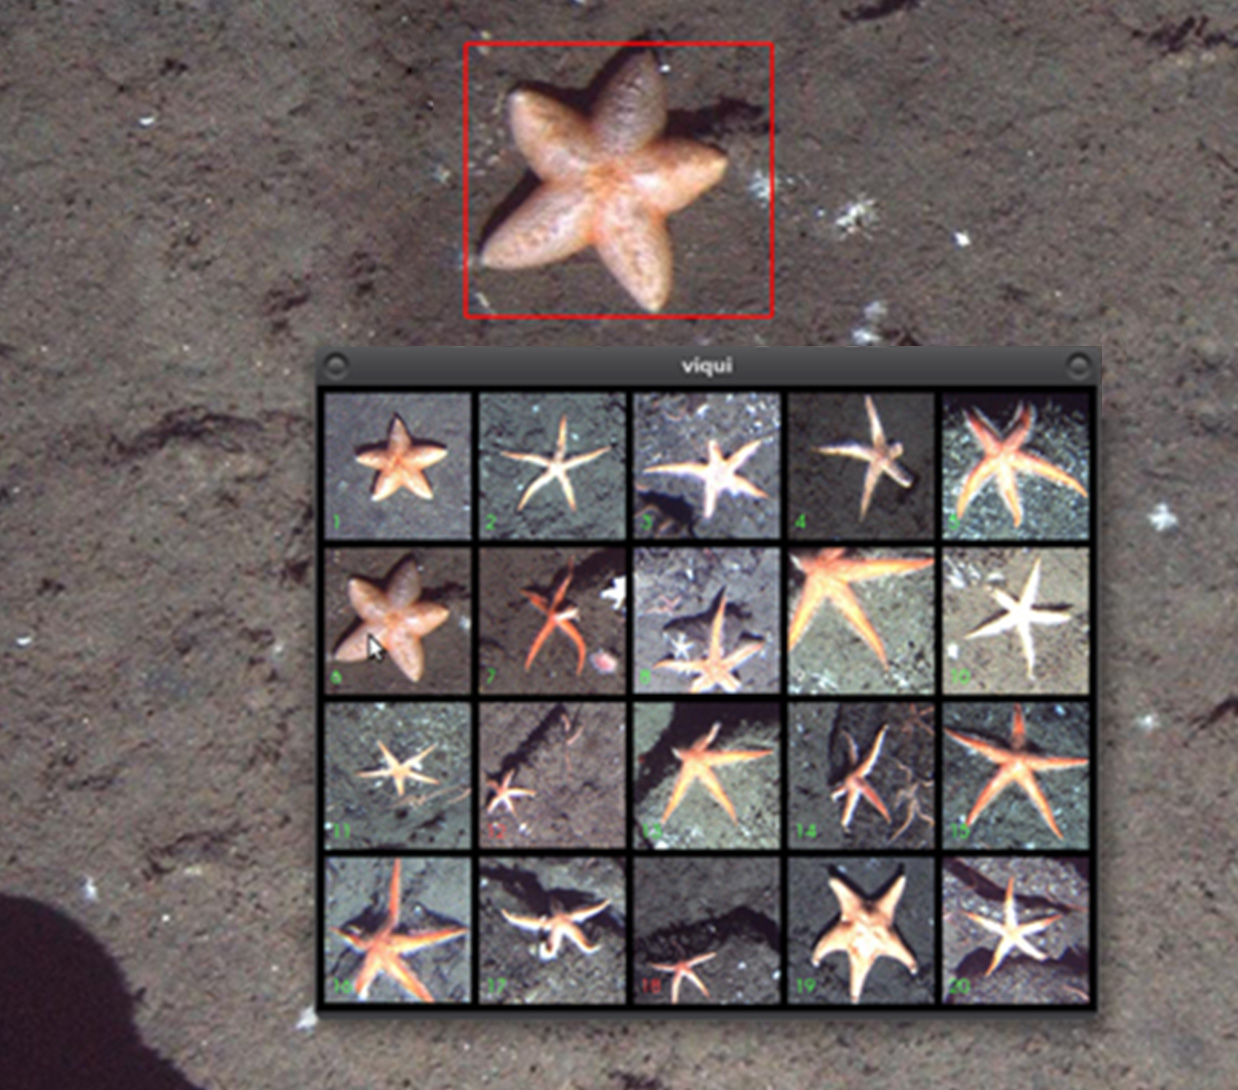 Sea bed floor with a star fish on it. It is surrounded by a red square and pop up next to it with other star fish.